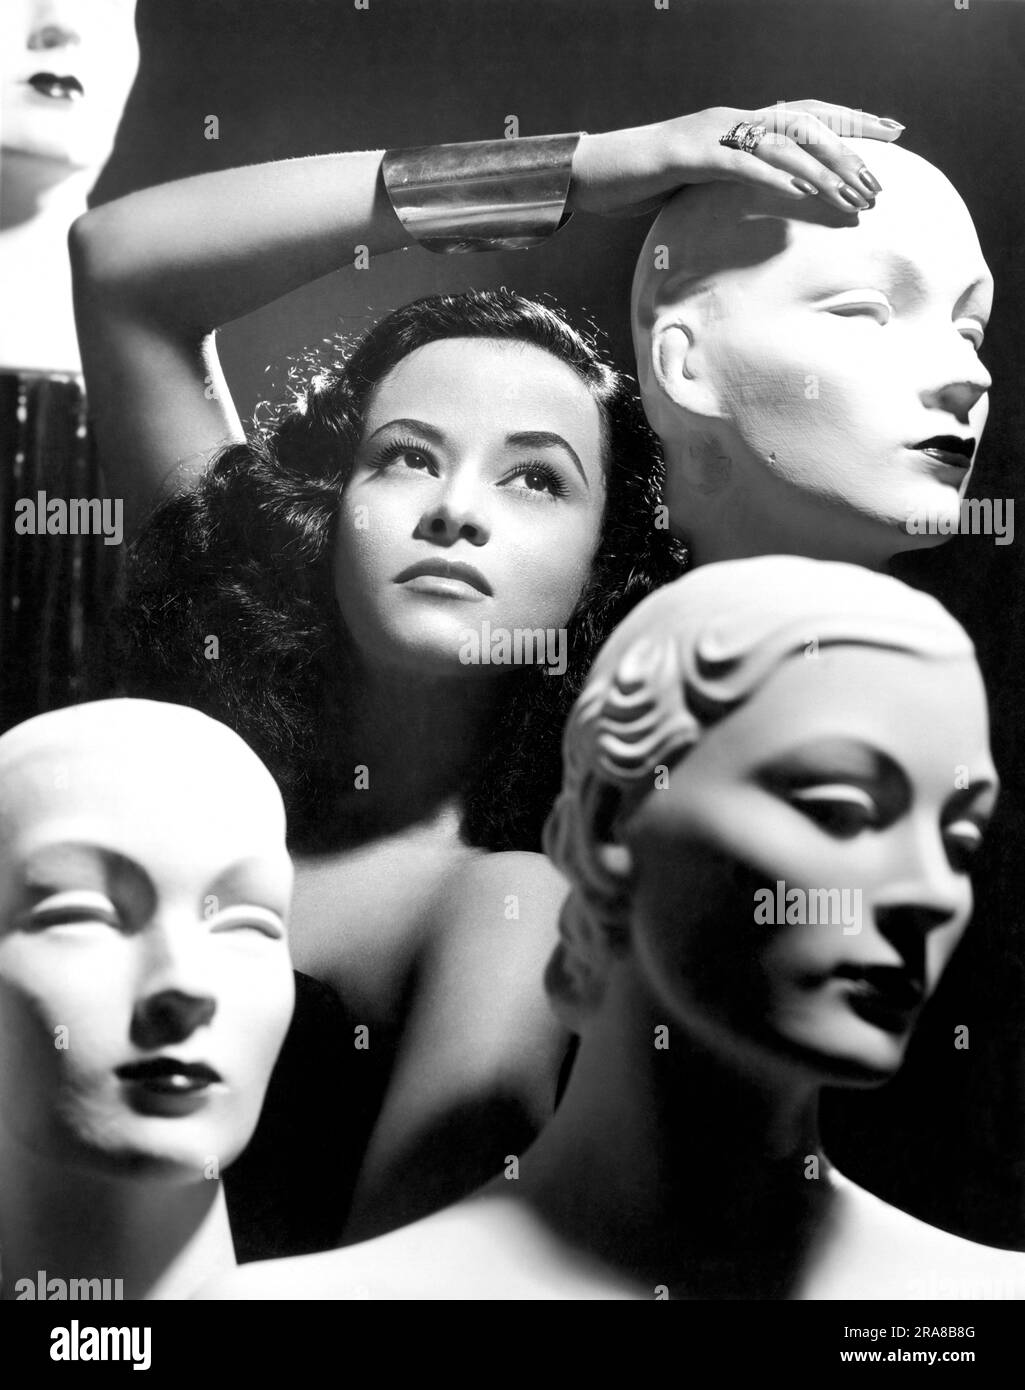 United States:  1952 A woman poses with mannequin heads in a promotional photograph for the 'Sans-Souci Revue'. Stock Photo